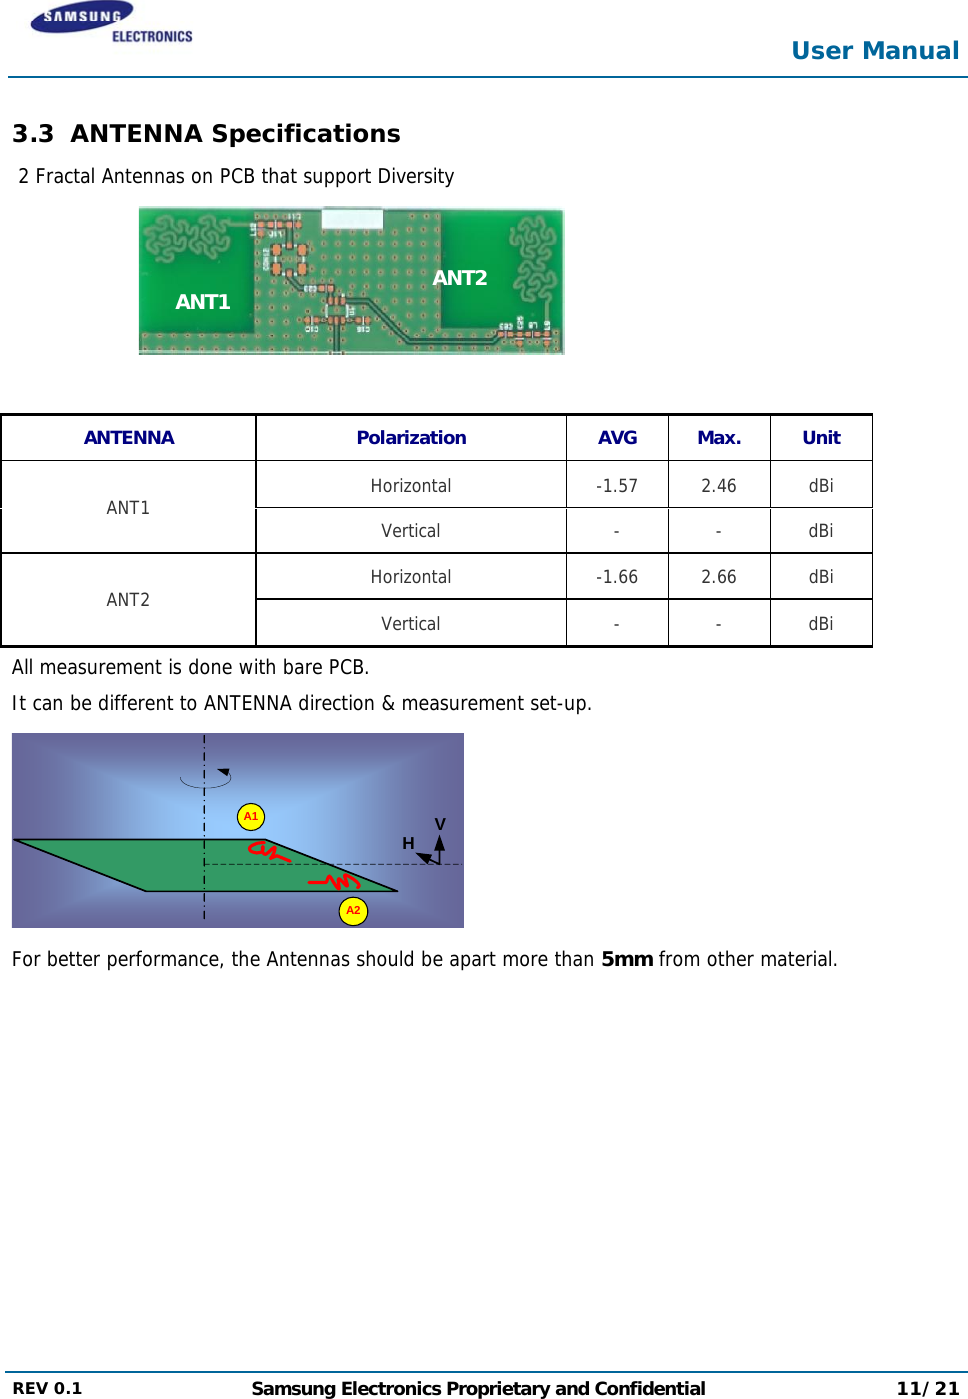  User Manual  REV 0.1  Samsung Electronics Proprietary and Confidential 11/21  3.3 ANTENNA Specifications  2 Fractal Antennas on PCB that support Diversity     ANTENNA Polarization AVG Max. Unit ANT1  Horizontal -1.57 2.46 dBi Vertical - - dBi ANT2  Horizontal -1.66 2.66 dBi Vertical - - dBi All measurement is done with bare PCB. It can be different to ANTENNA direction &amp; measurement set-up.  For better performance, the Antennas should be apart more than 5mm from other material.   ANT1ANT2A1A2VH